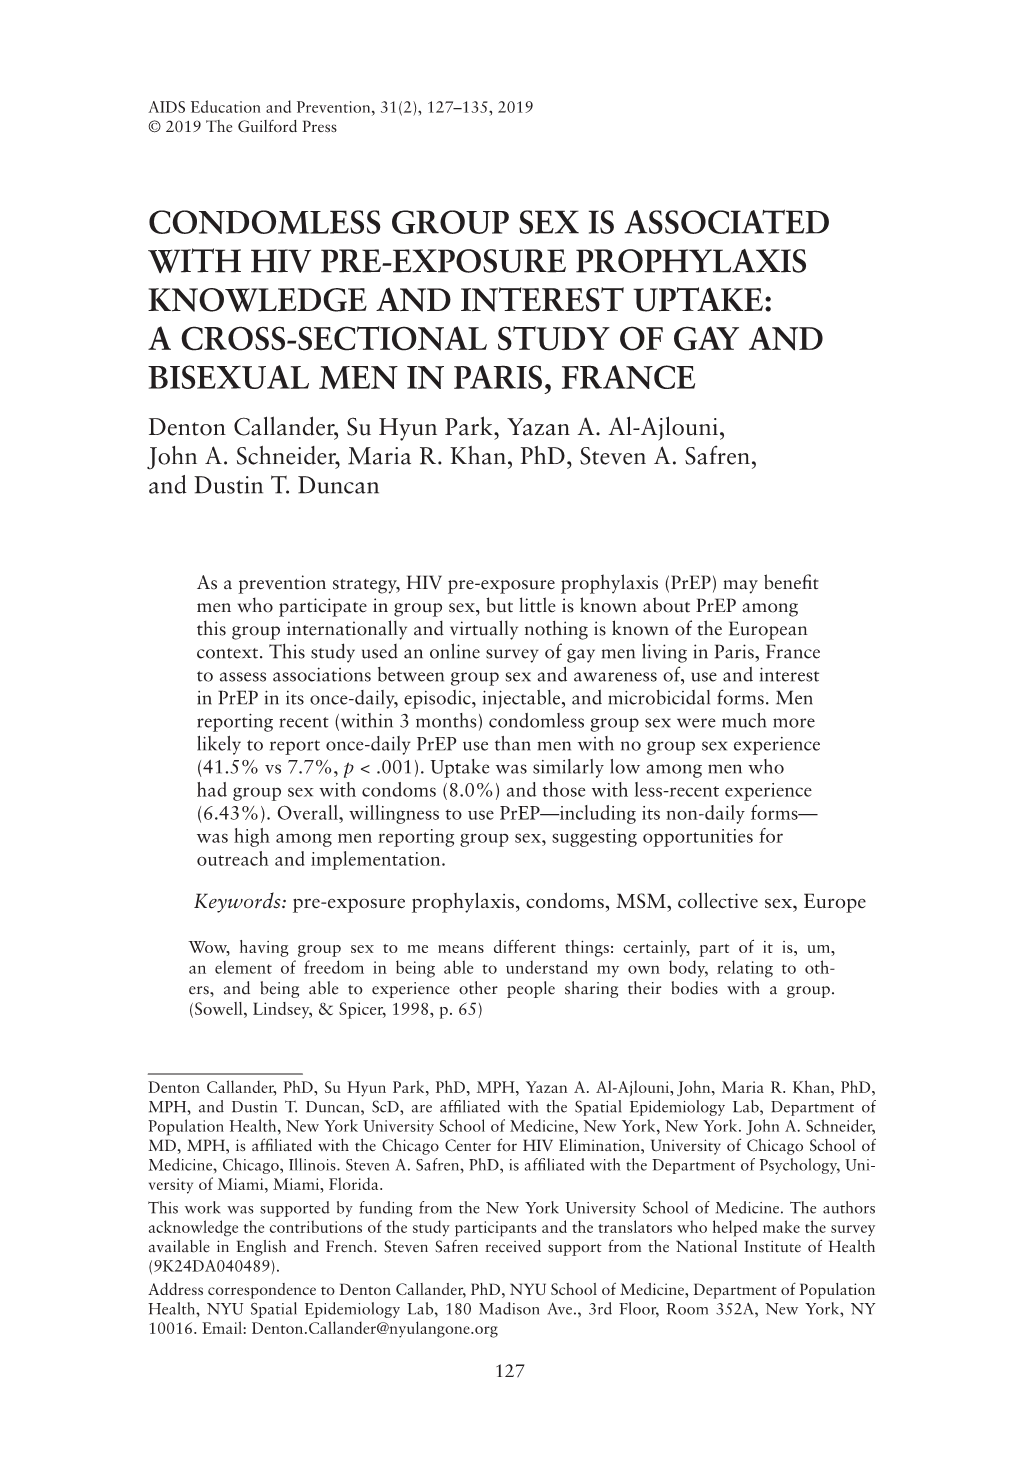 Condomless Group Sex Is Associated with Hiv Pre-Exposure Prophylaxis Knowledge and Interest Uptake: a Cross-Sectional Study Of